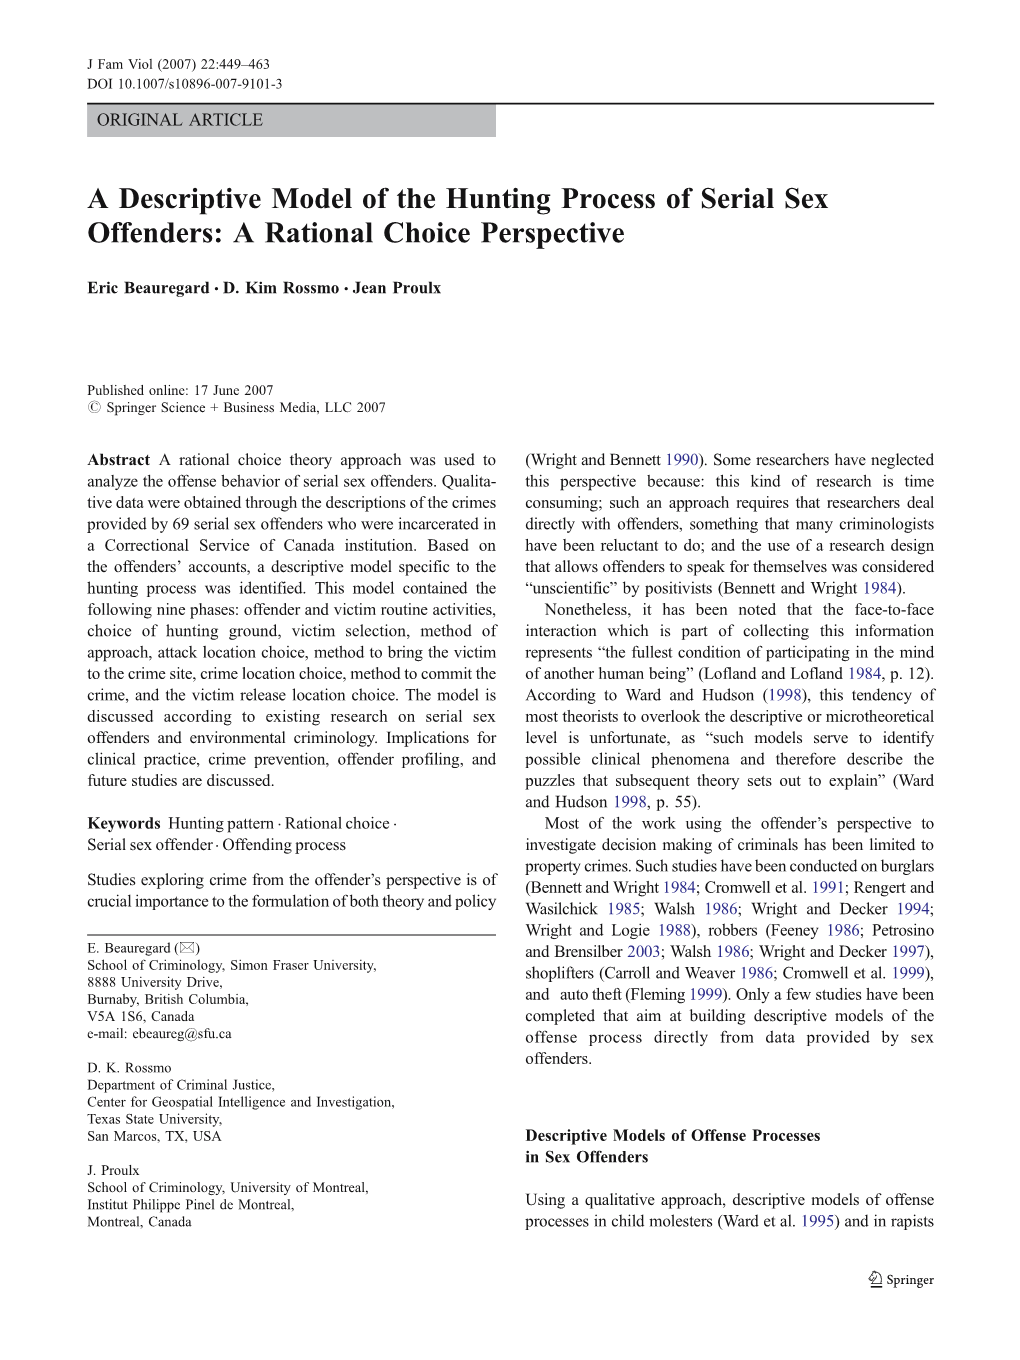 A Descriptive Model of the Hunting Process of Serial Sex Offenders: a Rational Choice Perspective